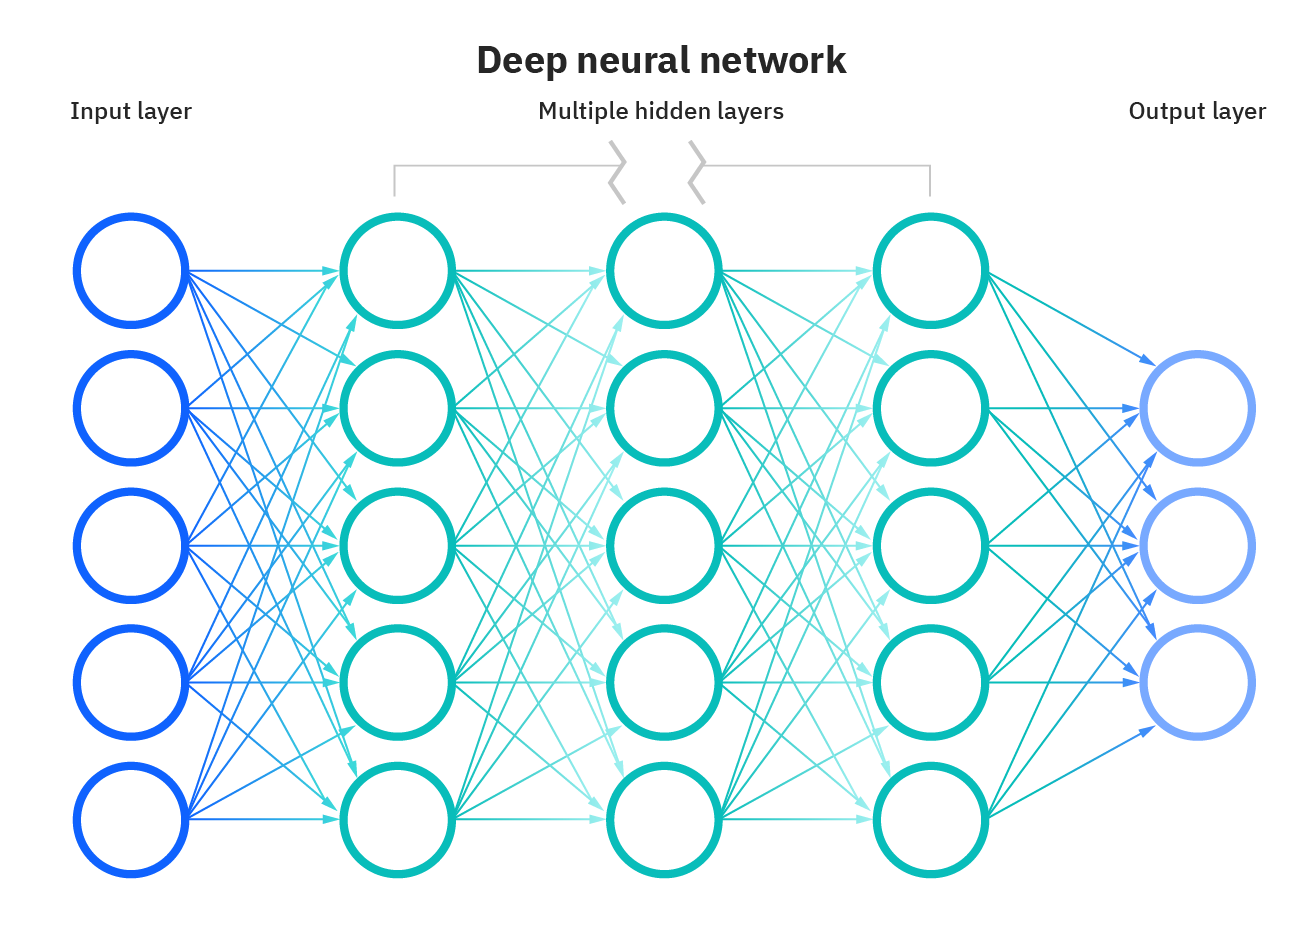 Overview of the architecture of a basic feed-forward neural network.